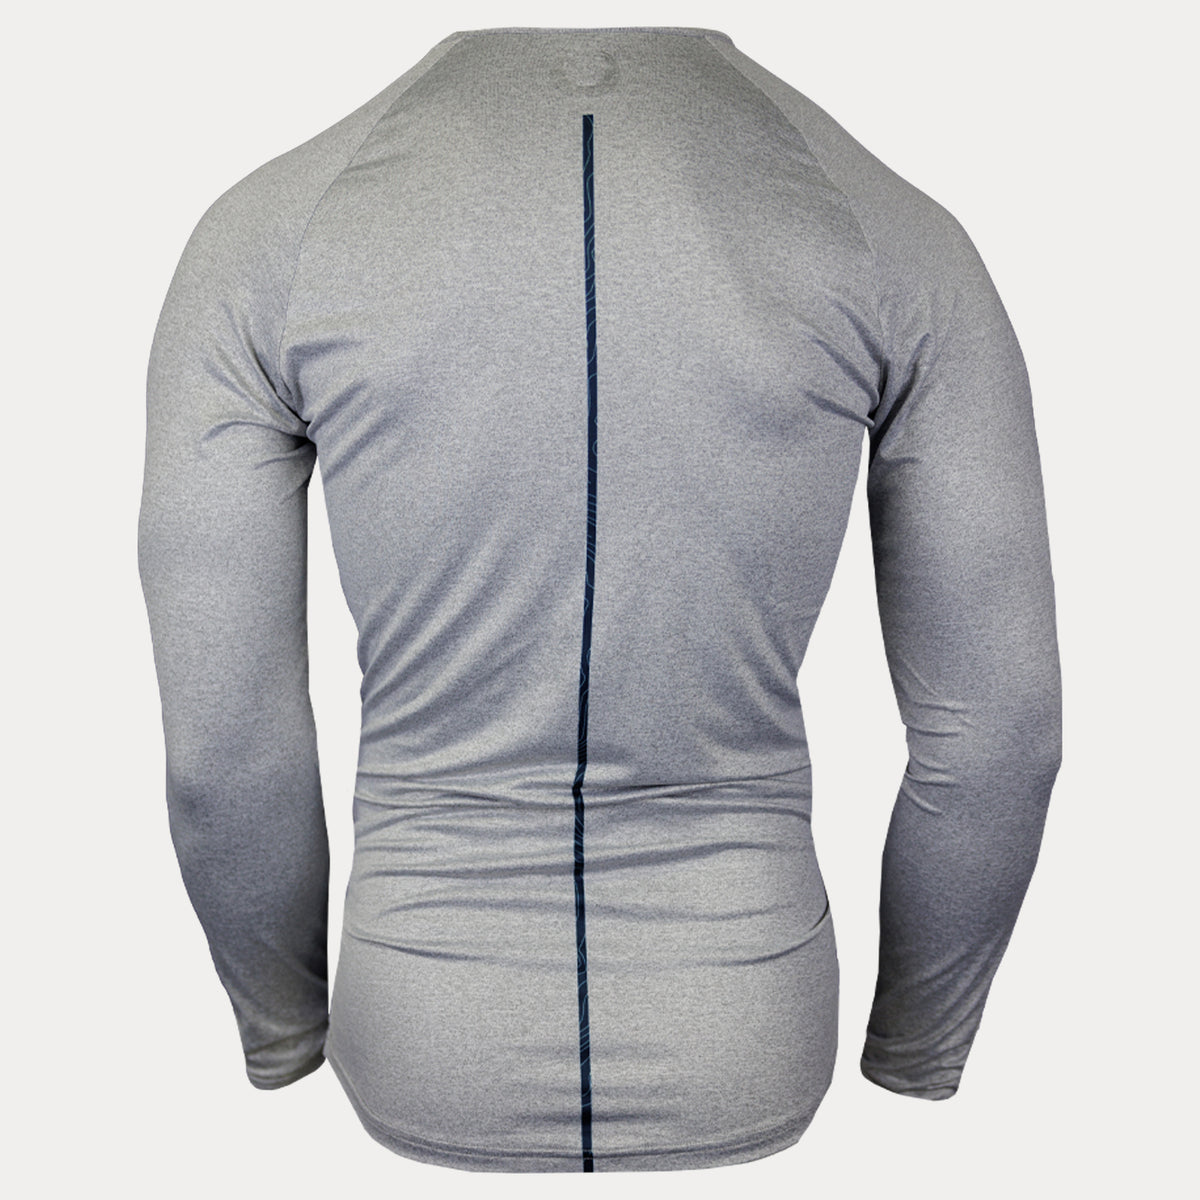 back view of grey ls shirt with blue vertical line on back